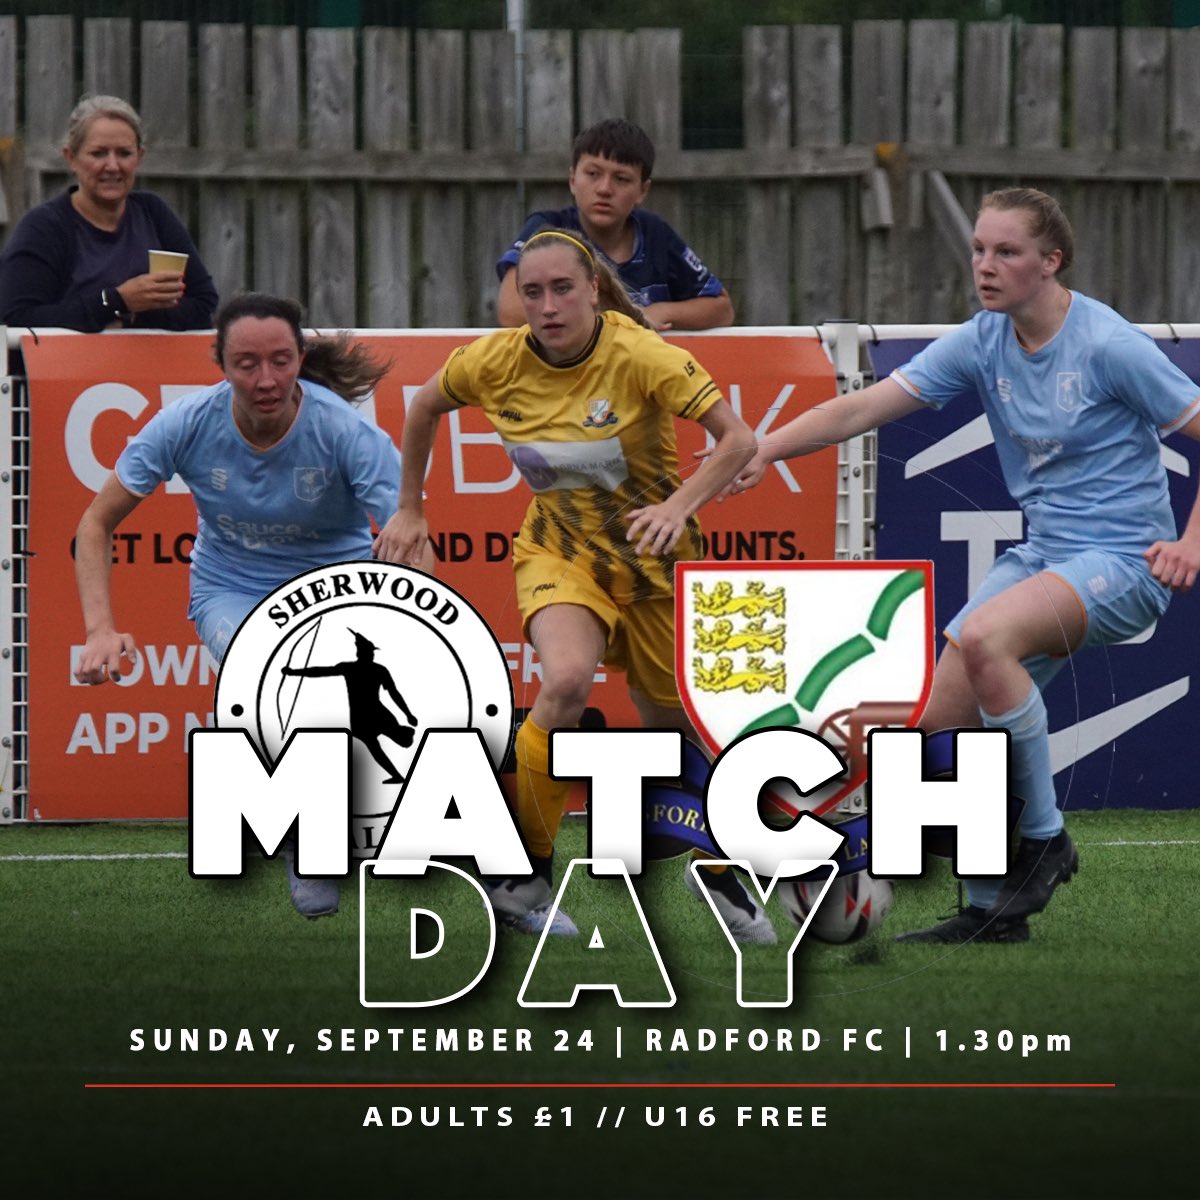 🏆 Our League Cup run starts now… 🆚 @sherwoodfcwomen ⏰ 13:30 🏟️ Oakfield Construction Arena, NG7 5EH 🎟️ Adults £1 // U16 FREE 🚗 A reminder that the Robin Hood Marathon is taking place today so please check your route to the ground in advance to avoid any delays.